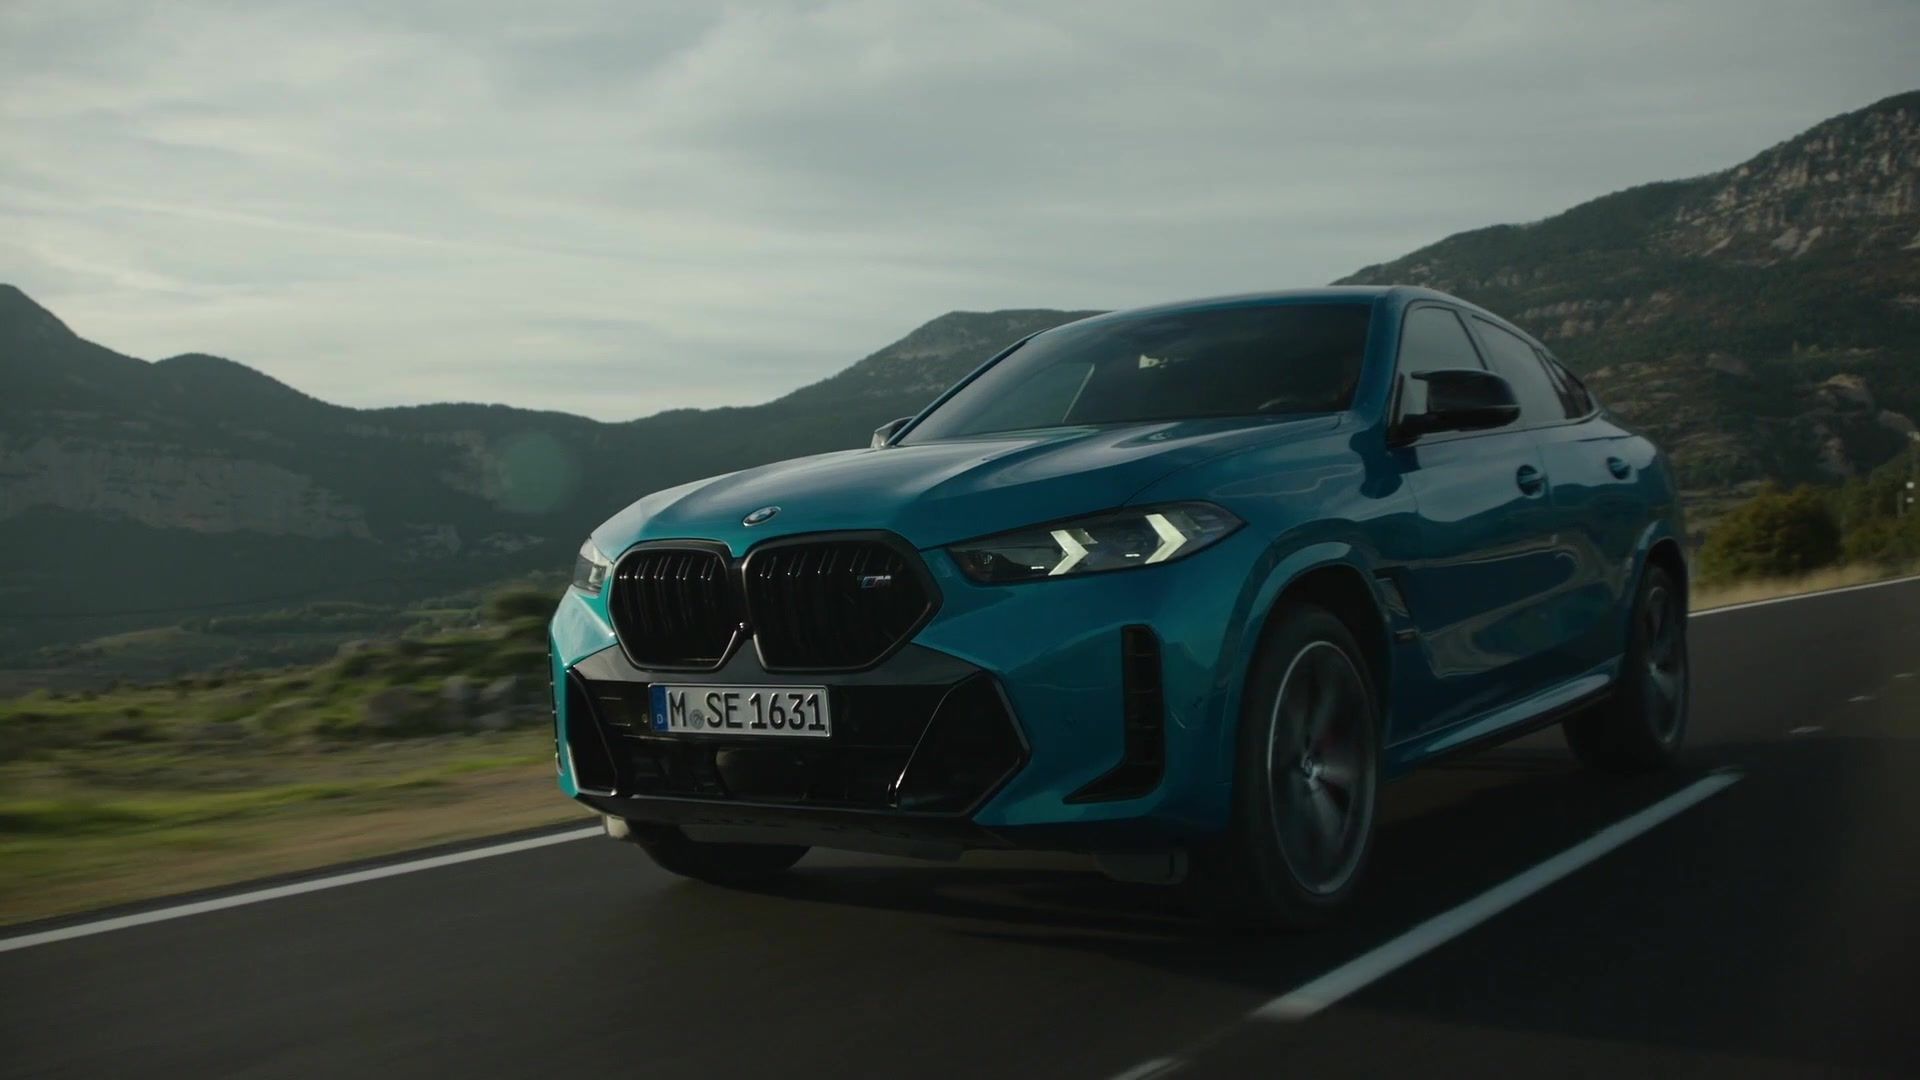 The BMW X6 M60i xDrive Preview